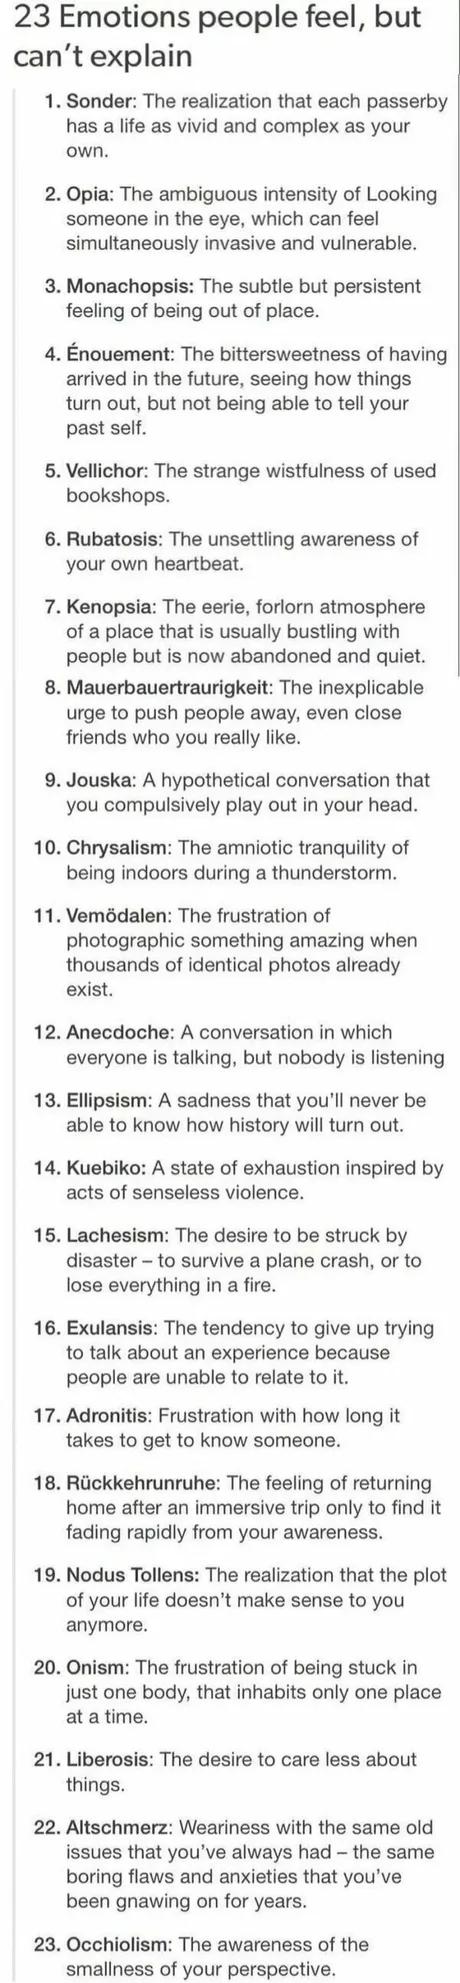 23 emotions Everyone Experiences But Can’t Always Explain